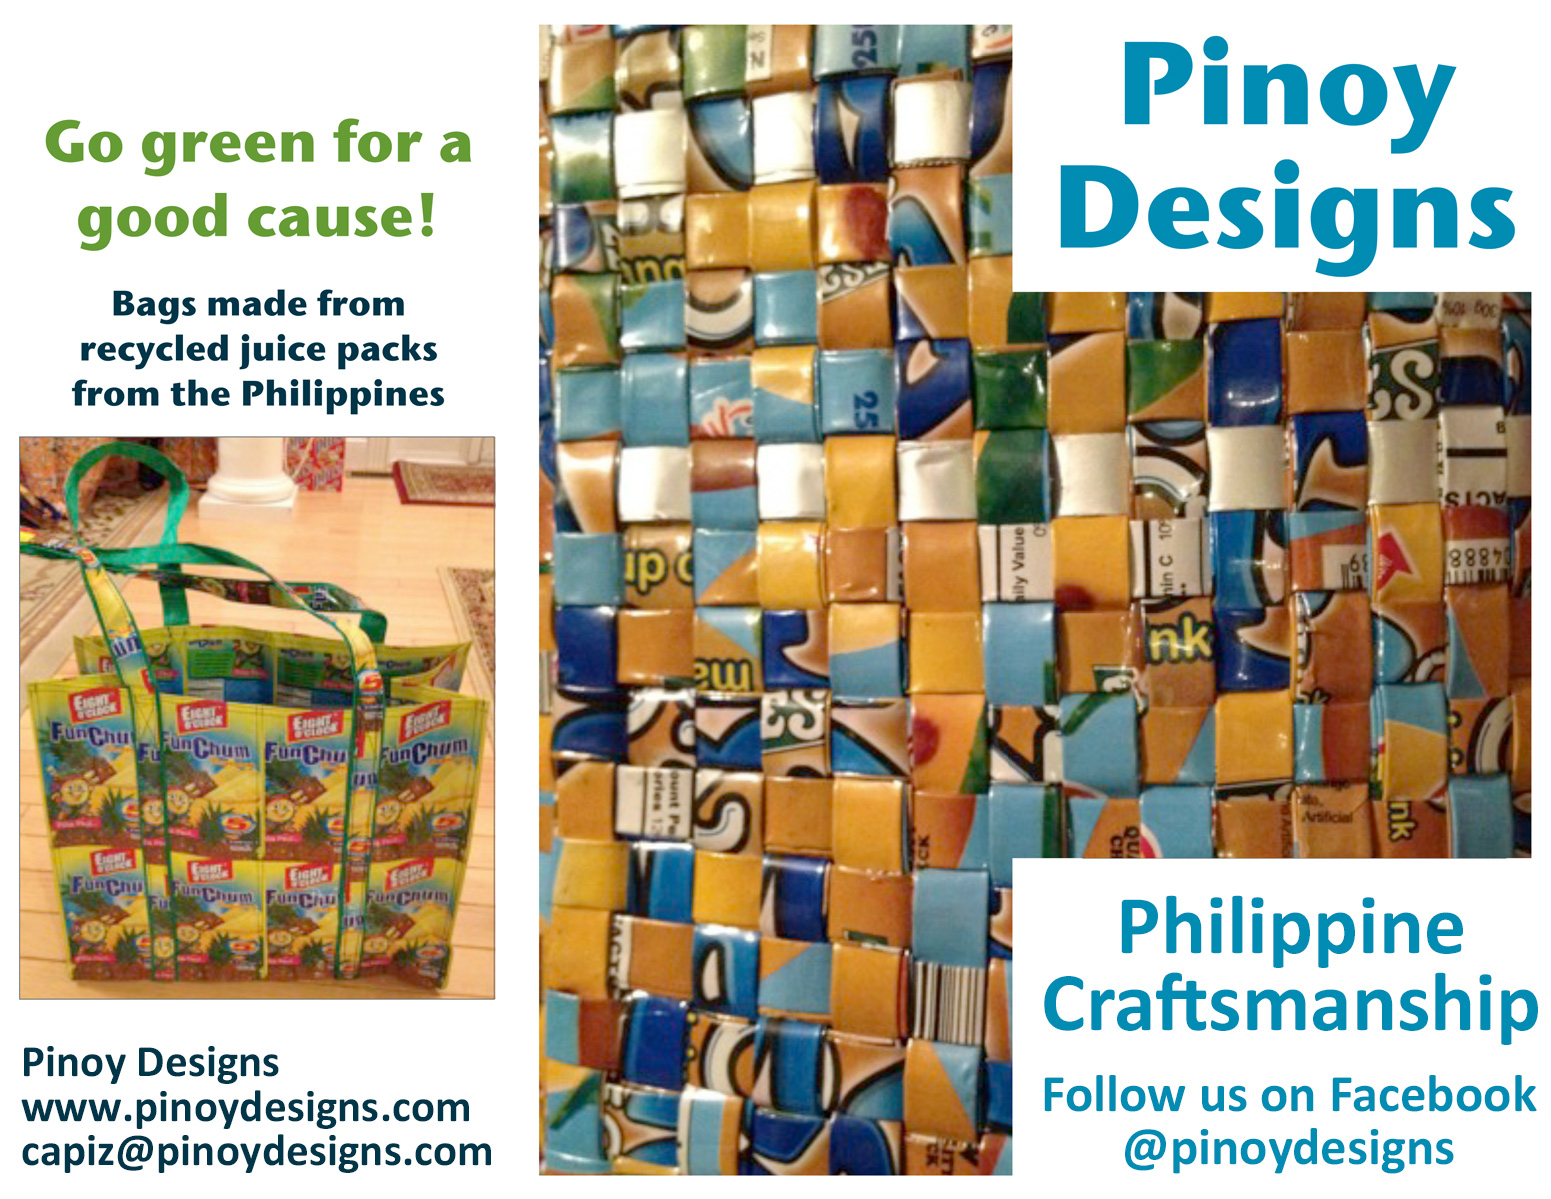 Bags made from recycled juice packs from the Philippines